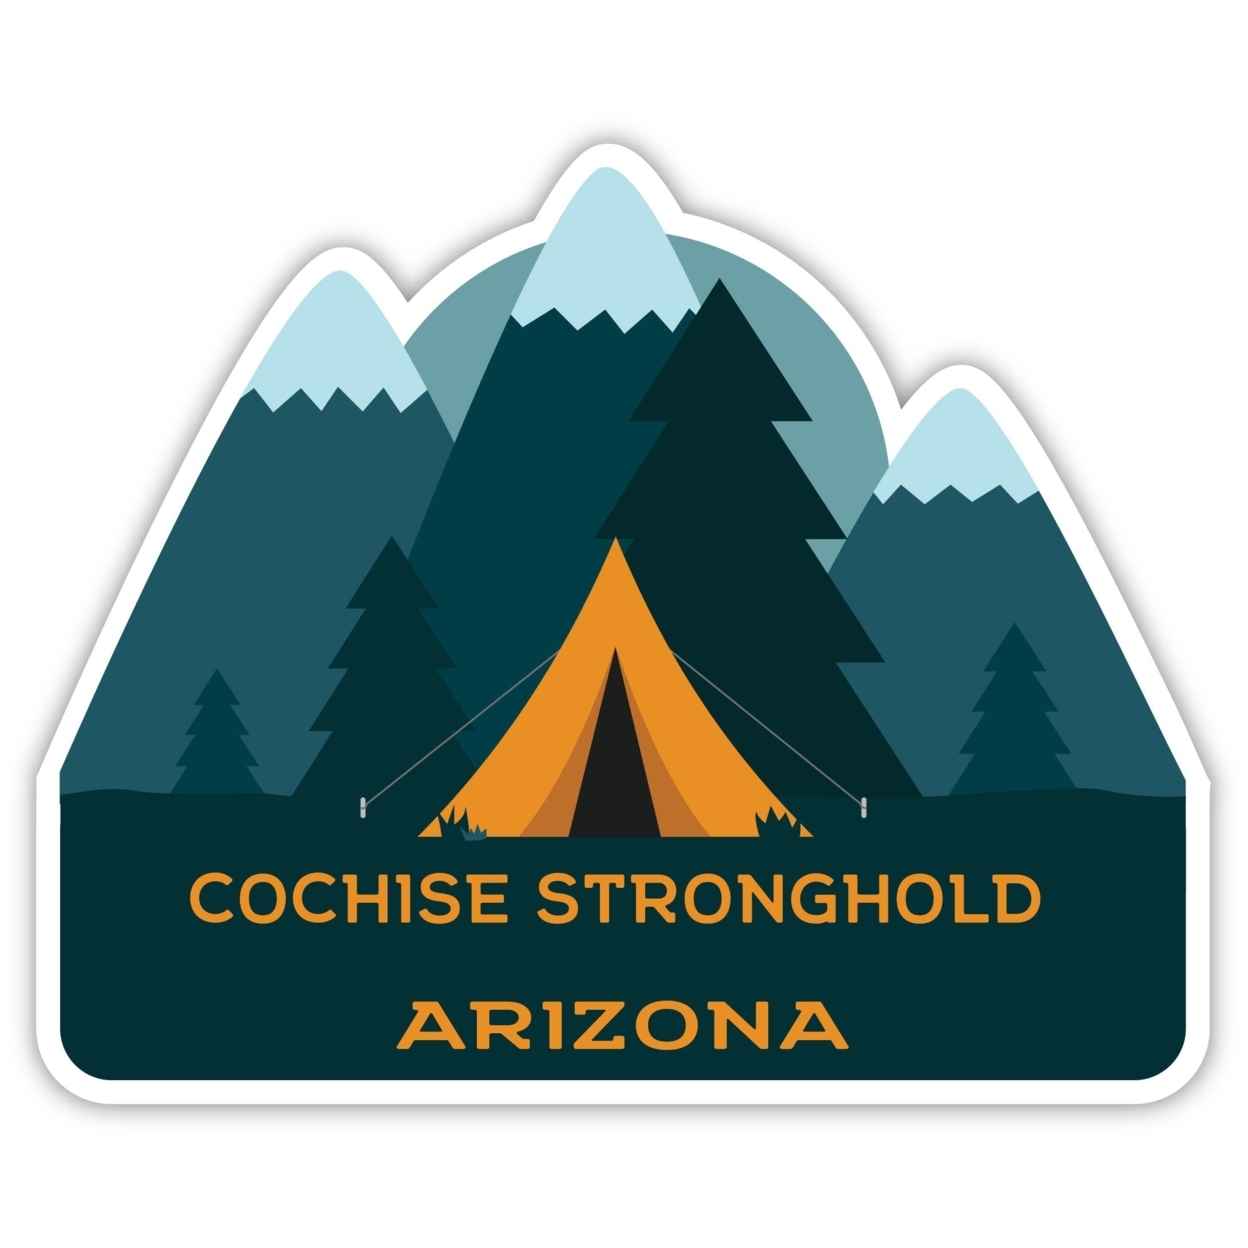 Cochise Stronghold Arizona Souvenir Decorative Stickers (Choose Theme And Size) - 4-Pack, 2-Inch, Tent